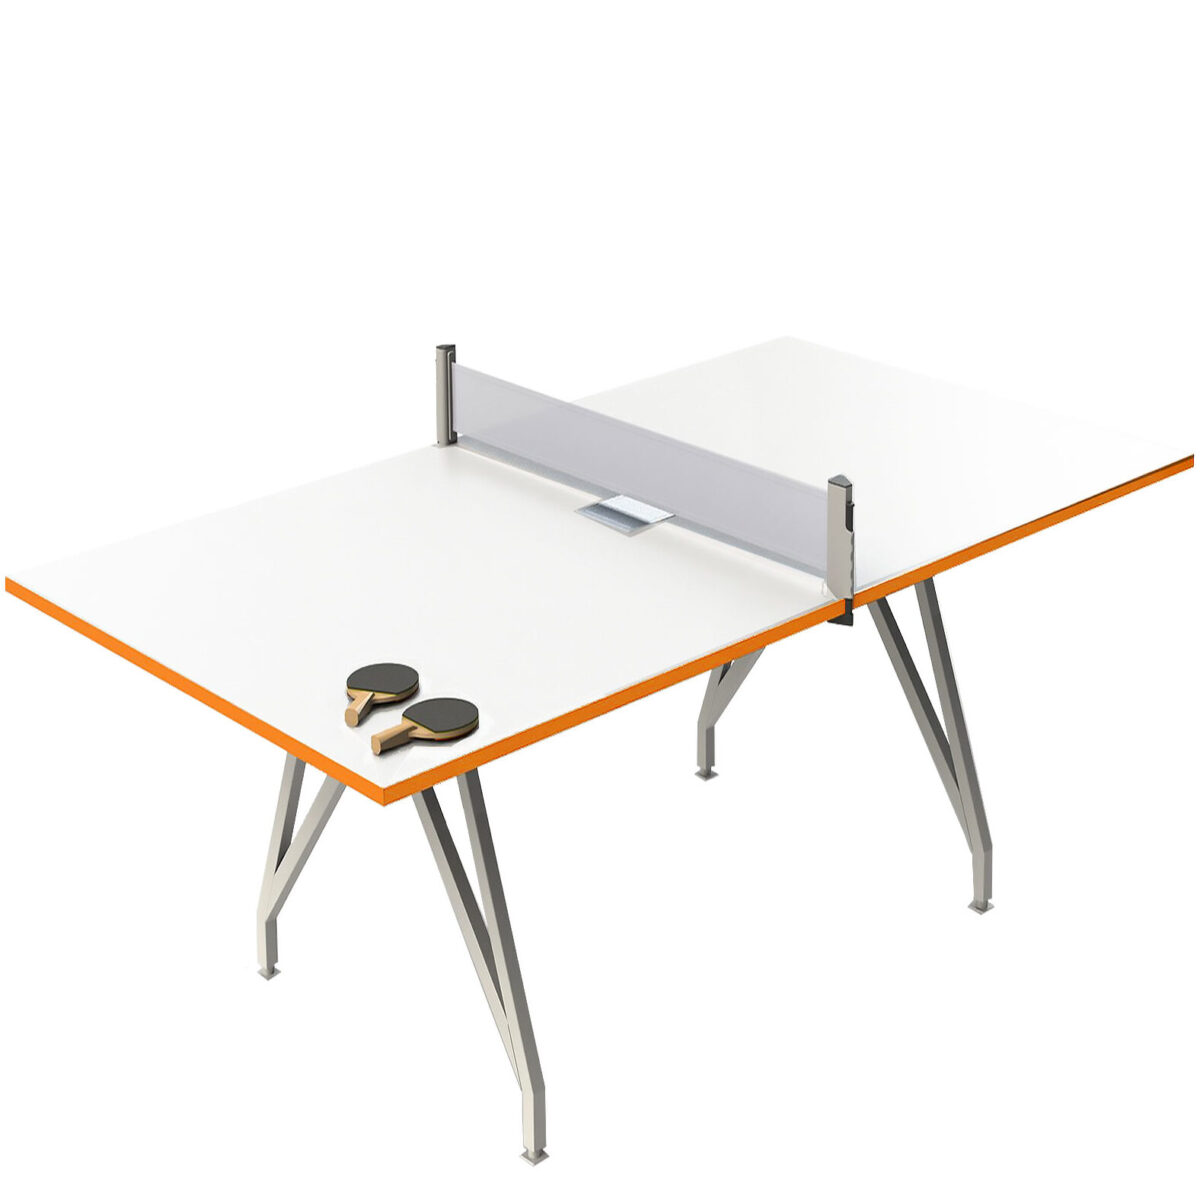 scale-1 to 1-eyhov conference-and ping pong table with Orange edge banding